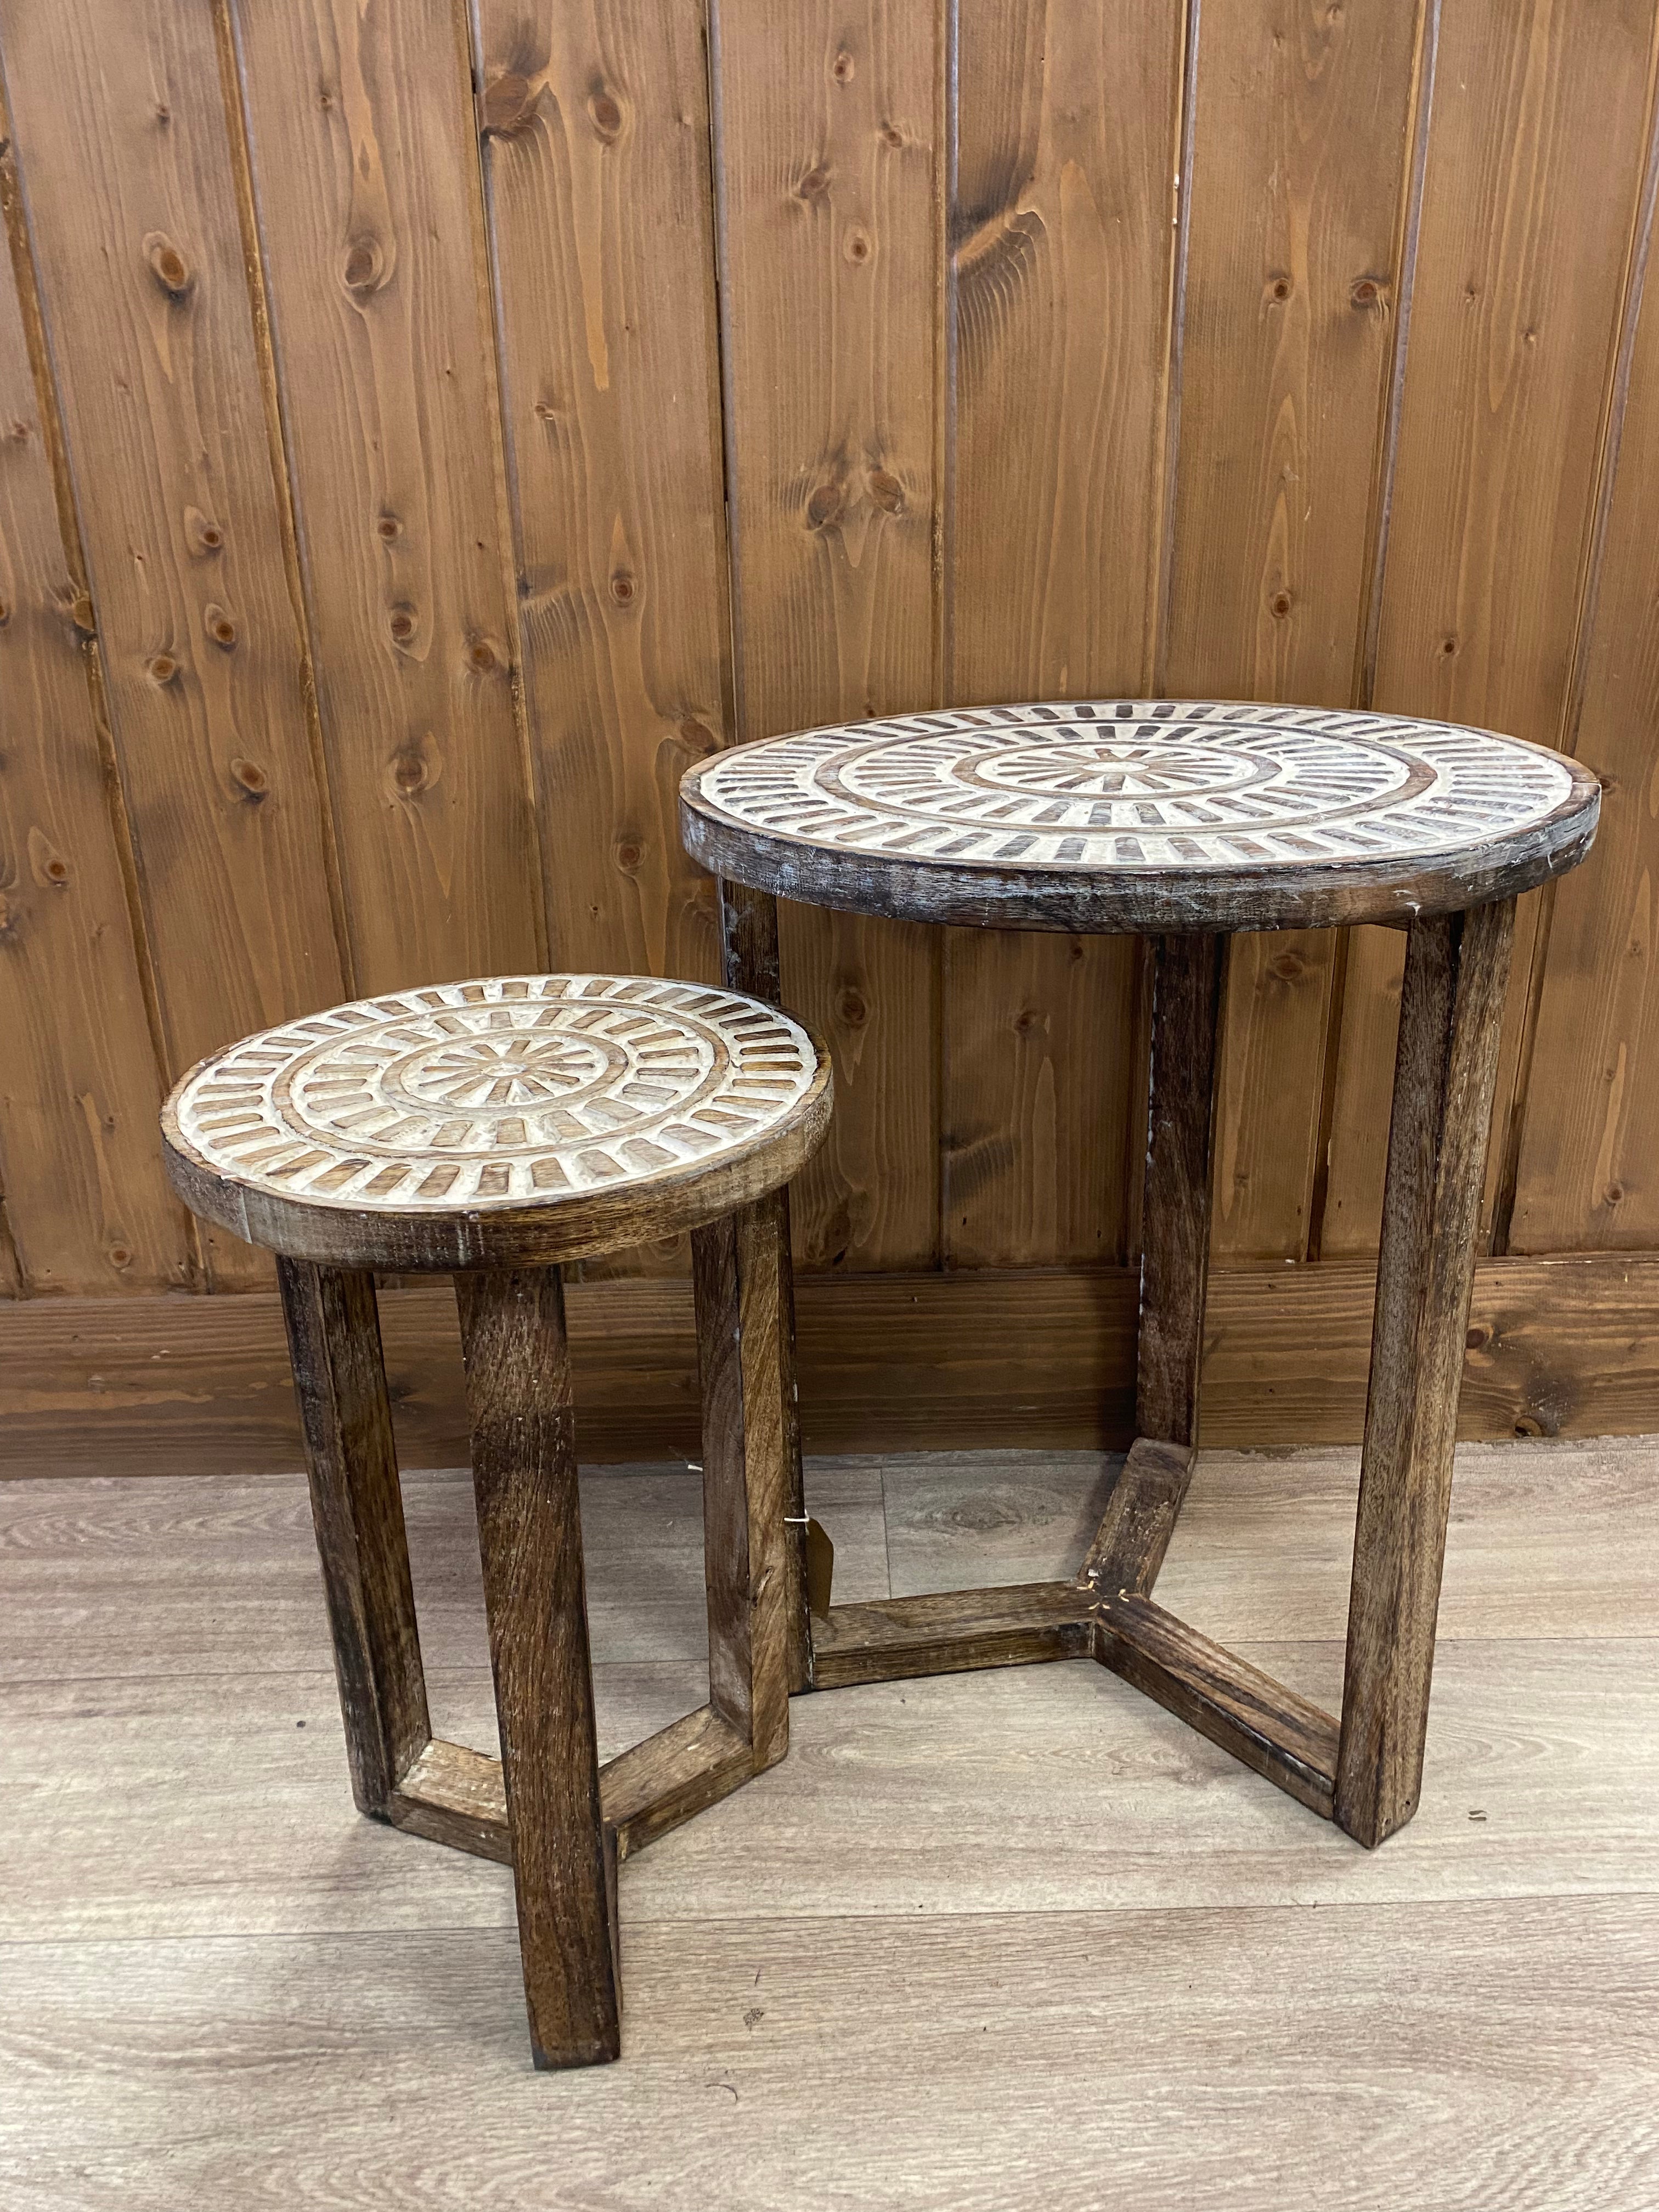 Set of 2 wooden tables with pretty cut out pattern